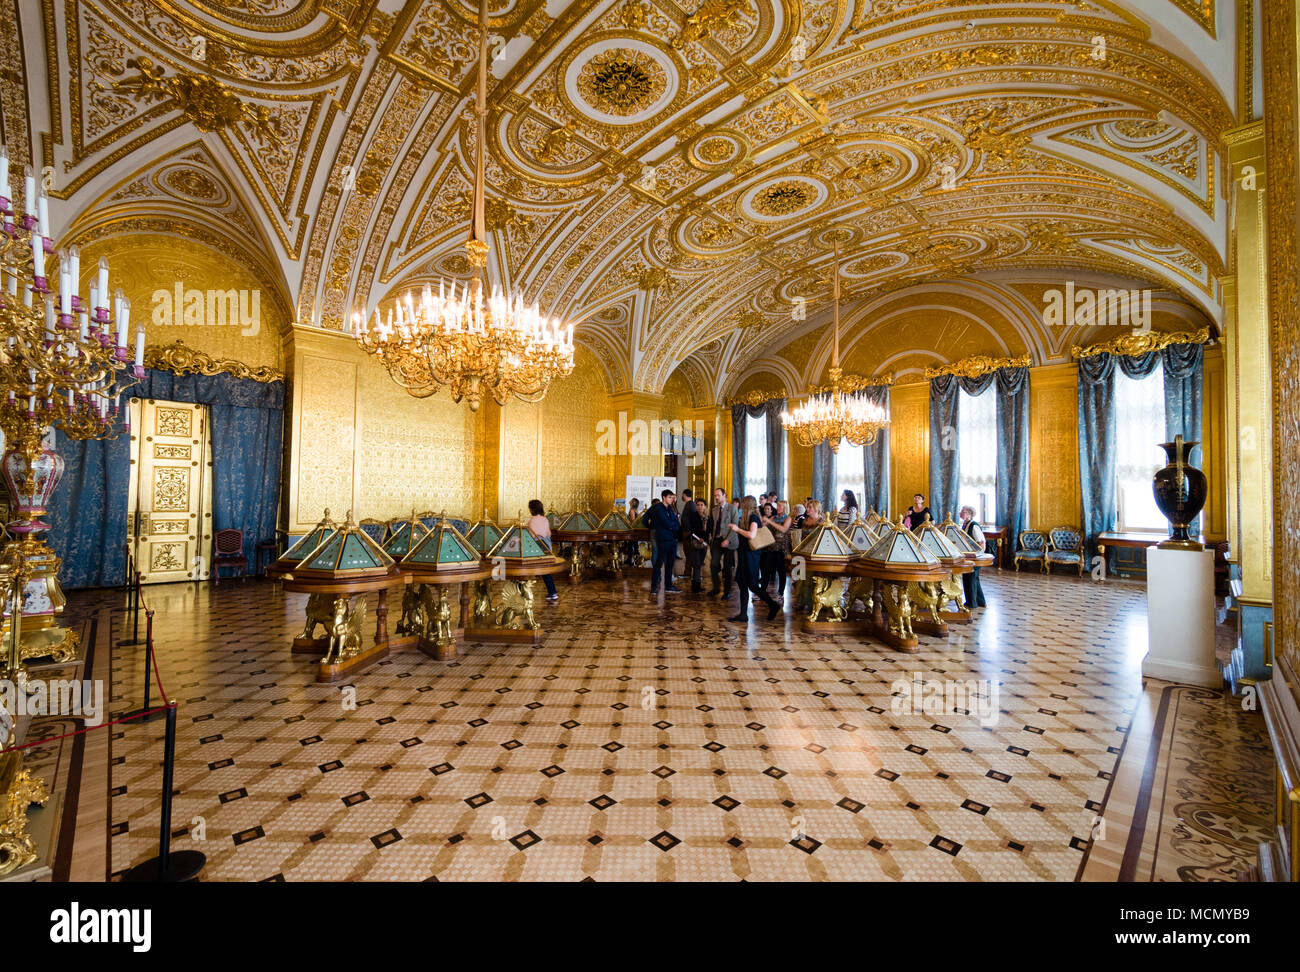 St. Petersburg, Russia: Winter Palace interior, Hermitage Museum complex Stock Photo